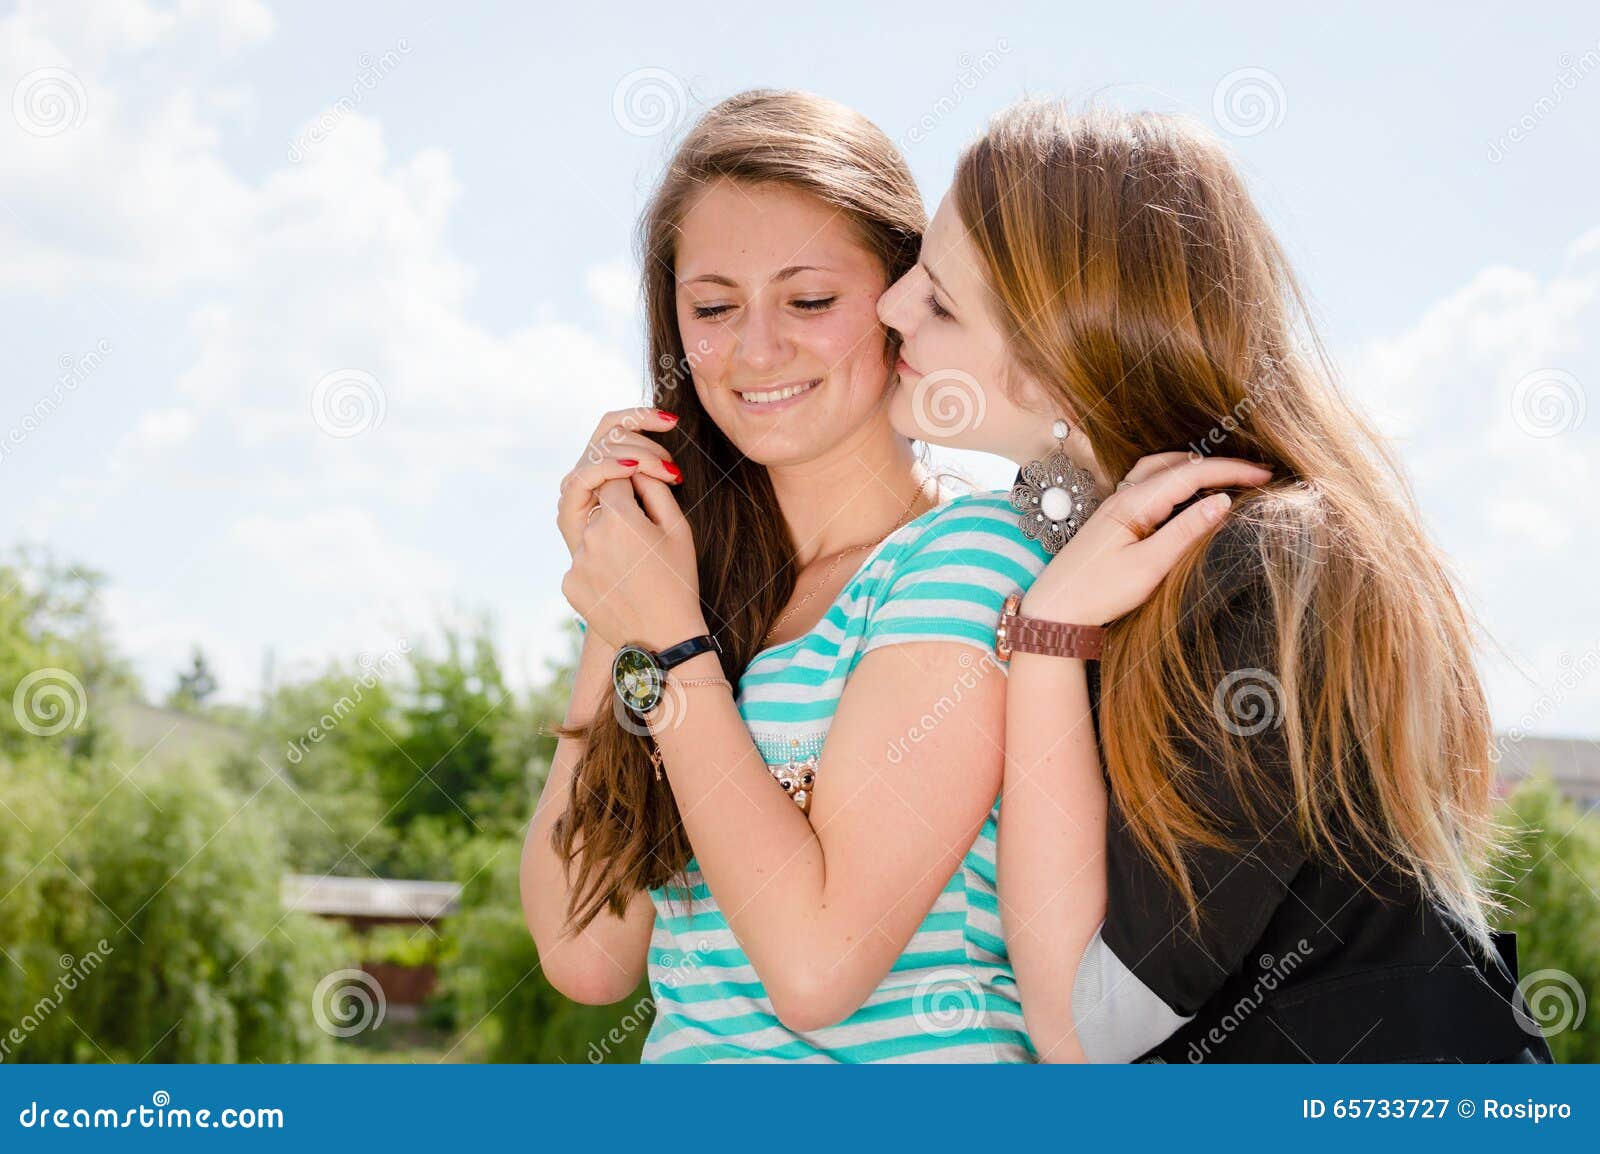 Two Smiling Girls Whispering Gossip Stock Image - Image of girlfriends ...